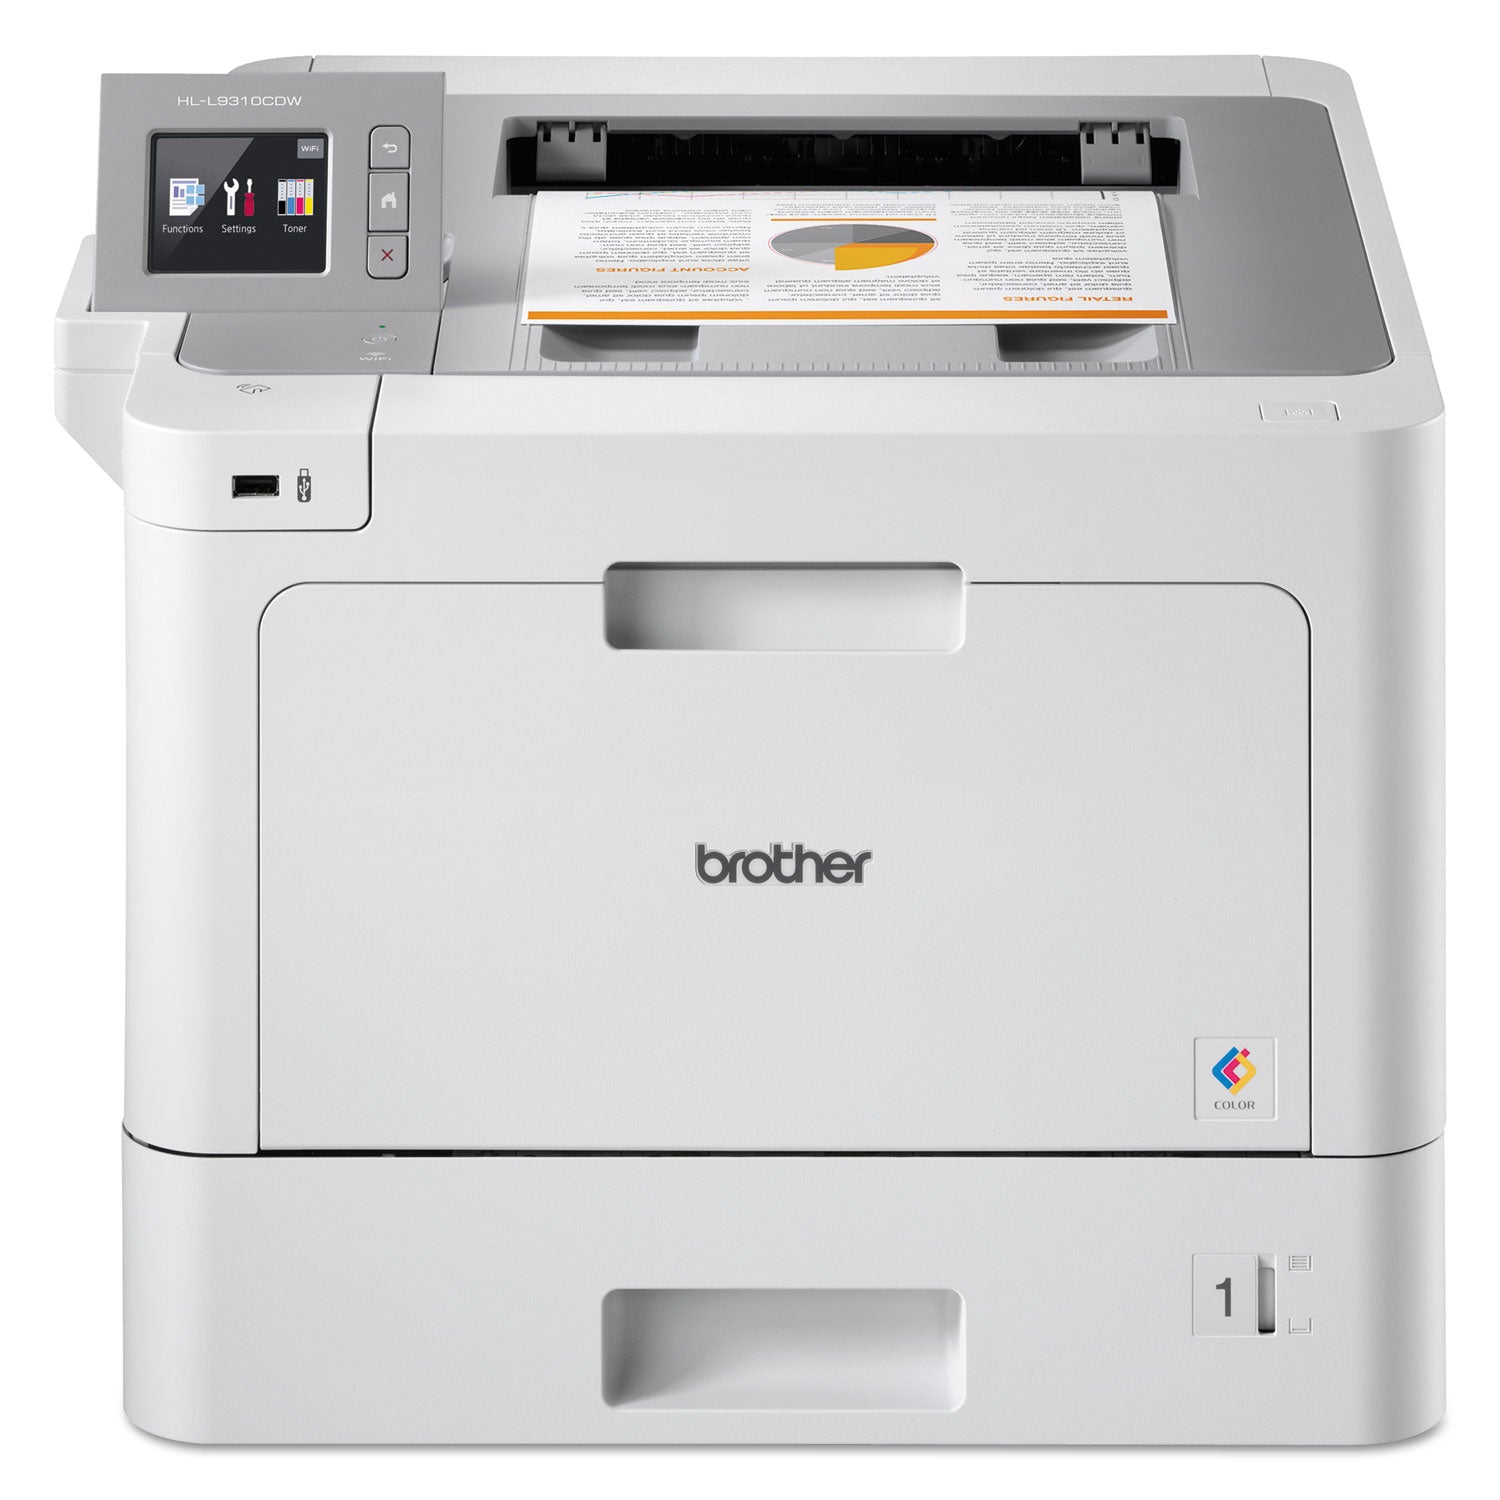 Brother Business Color Laser Printer HL-L9310CDW - for Mid-Size Workgroups with Higher Print Volumes - 1